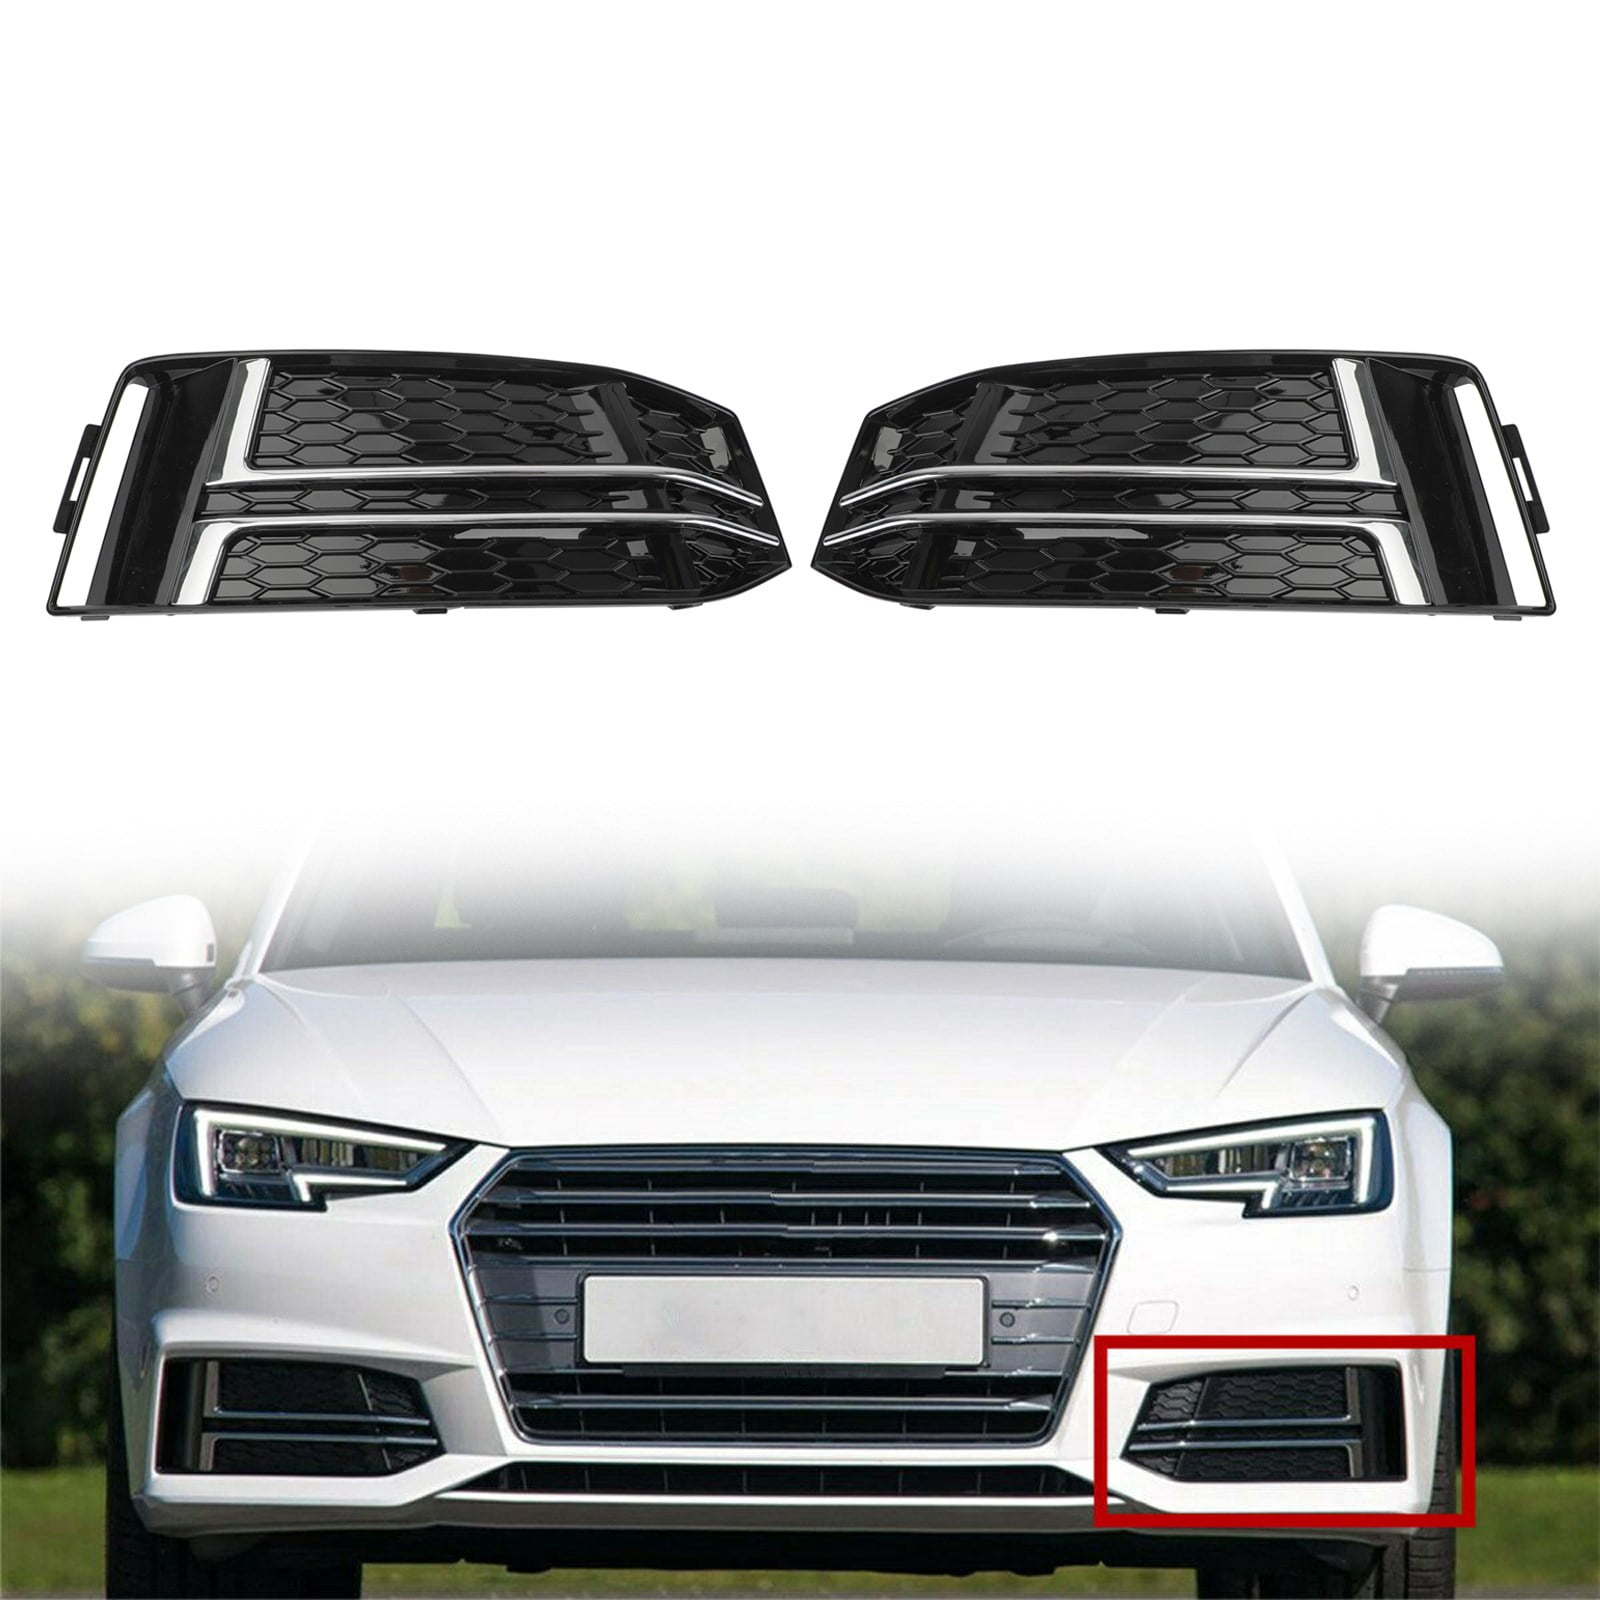 AUDI A4 RIGHT DRIVERS SIDE LOWER FRONT BUMPER FOG LIGHT GRILLE COVER TRIM VENT 